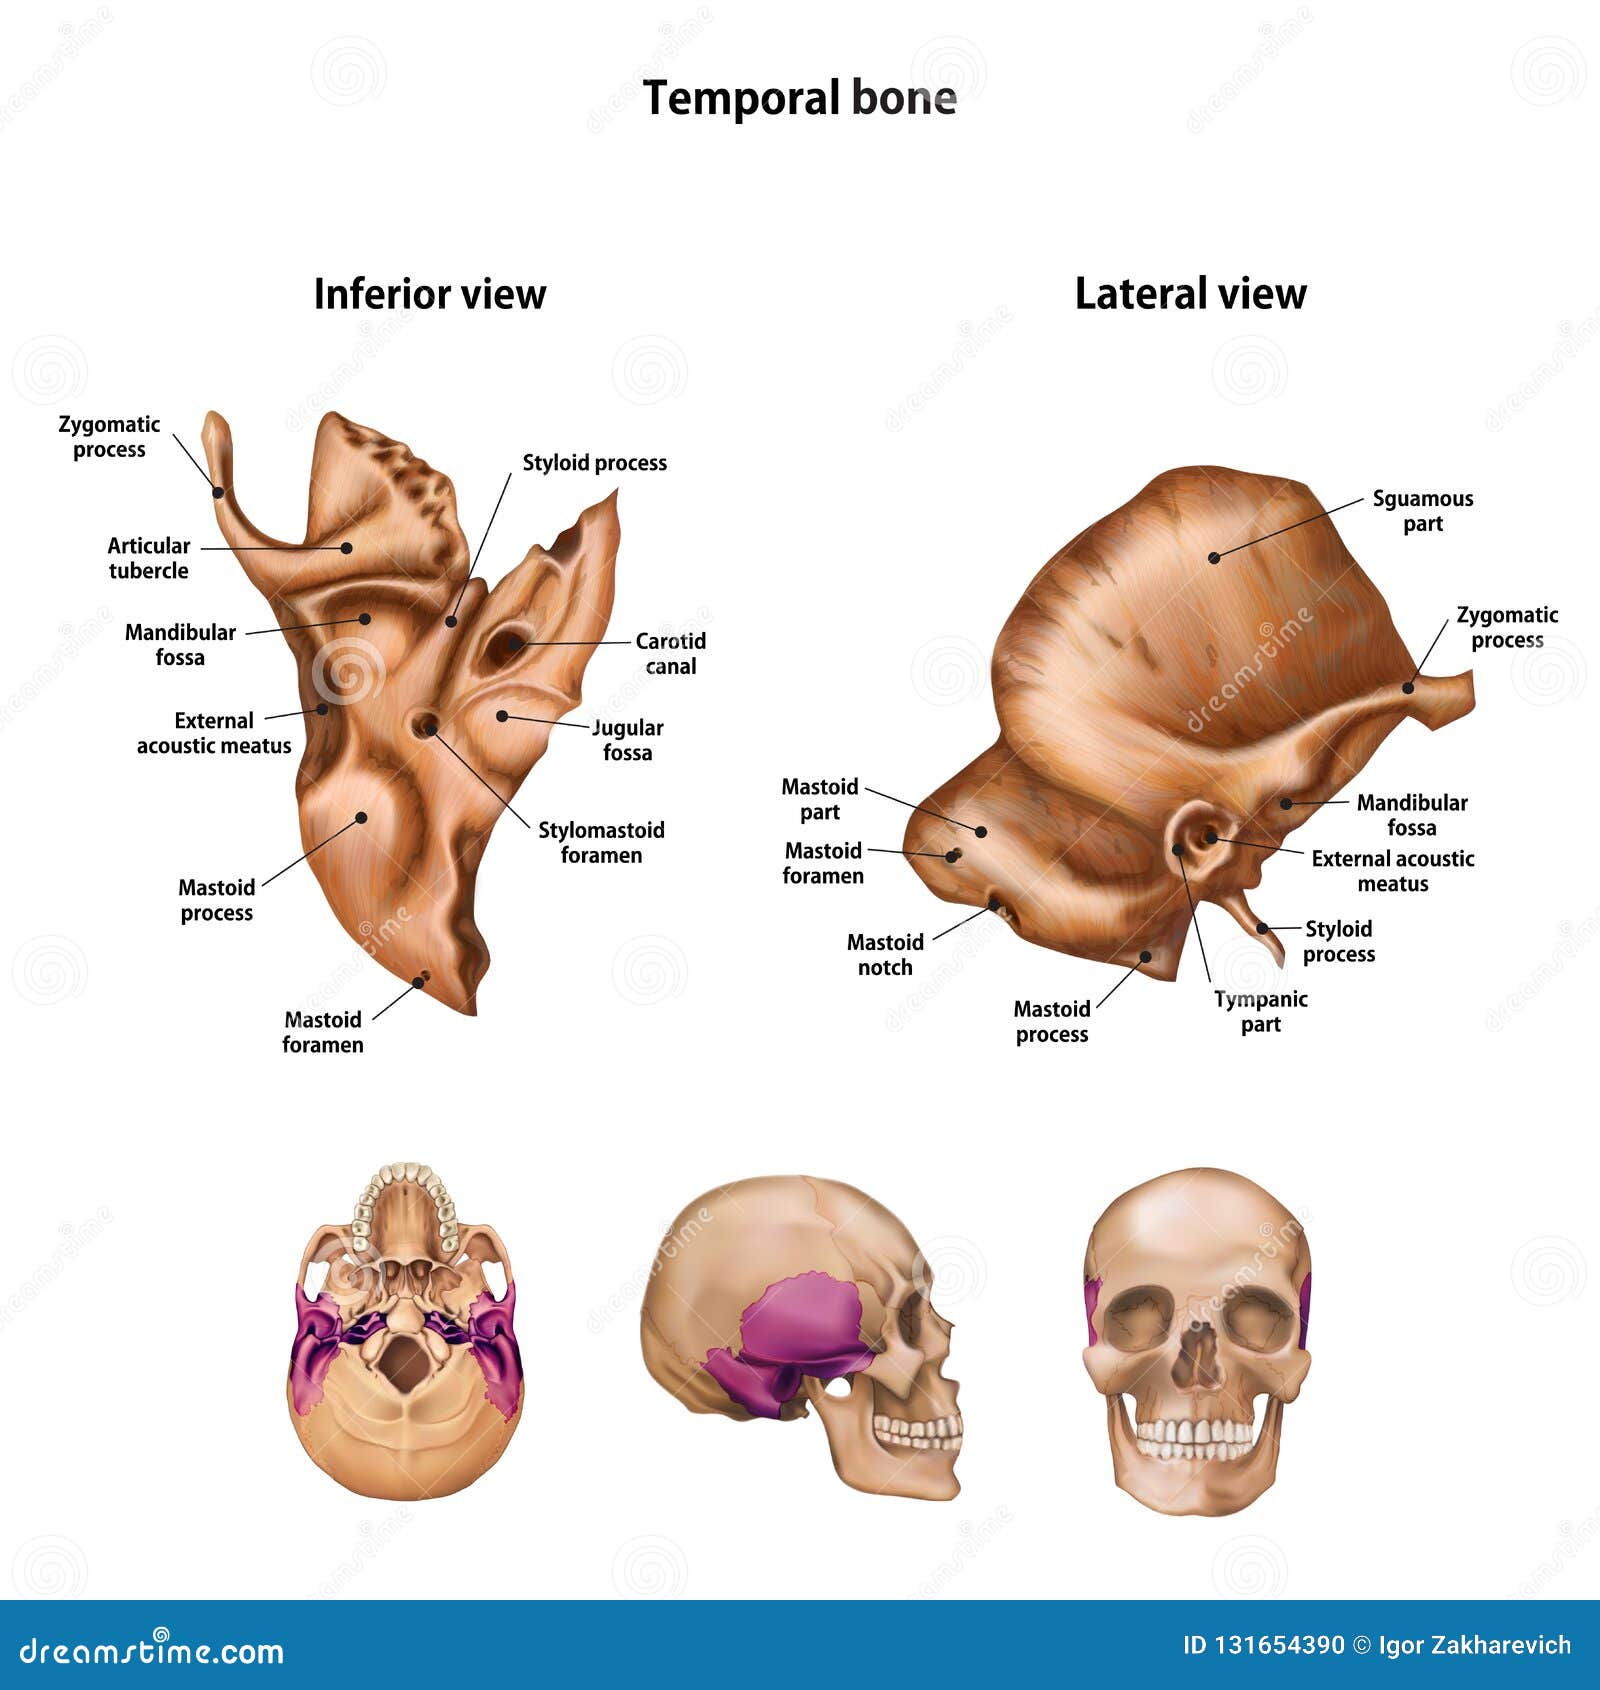 temporal bone. with the name and description of all sites